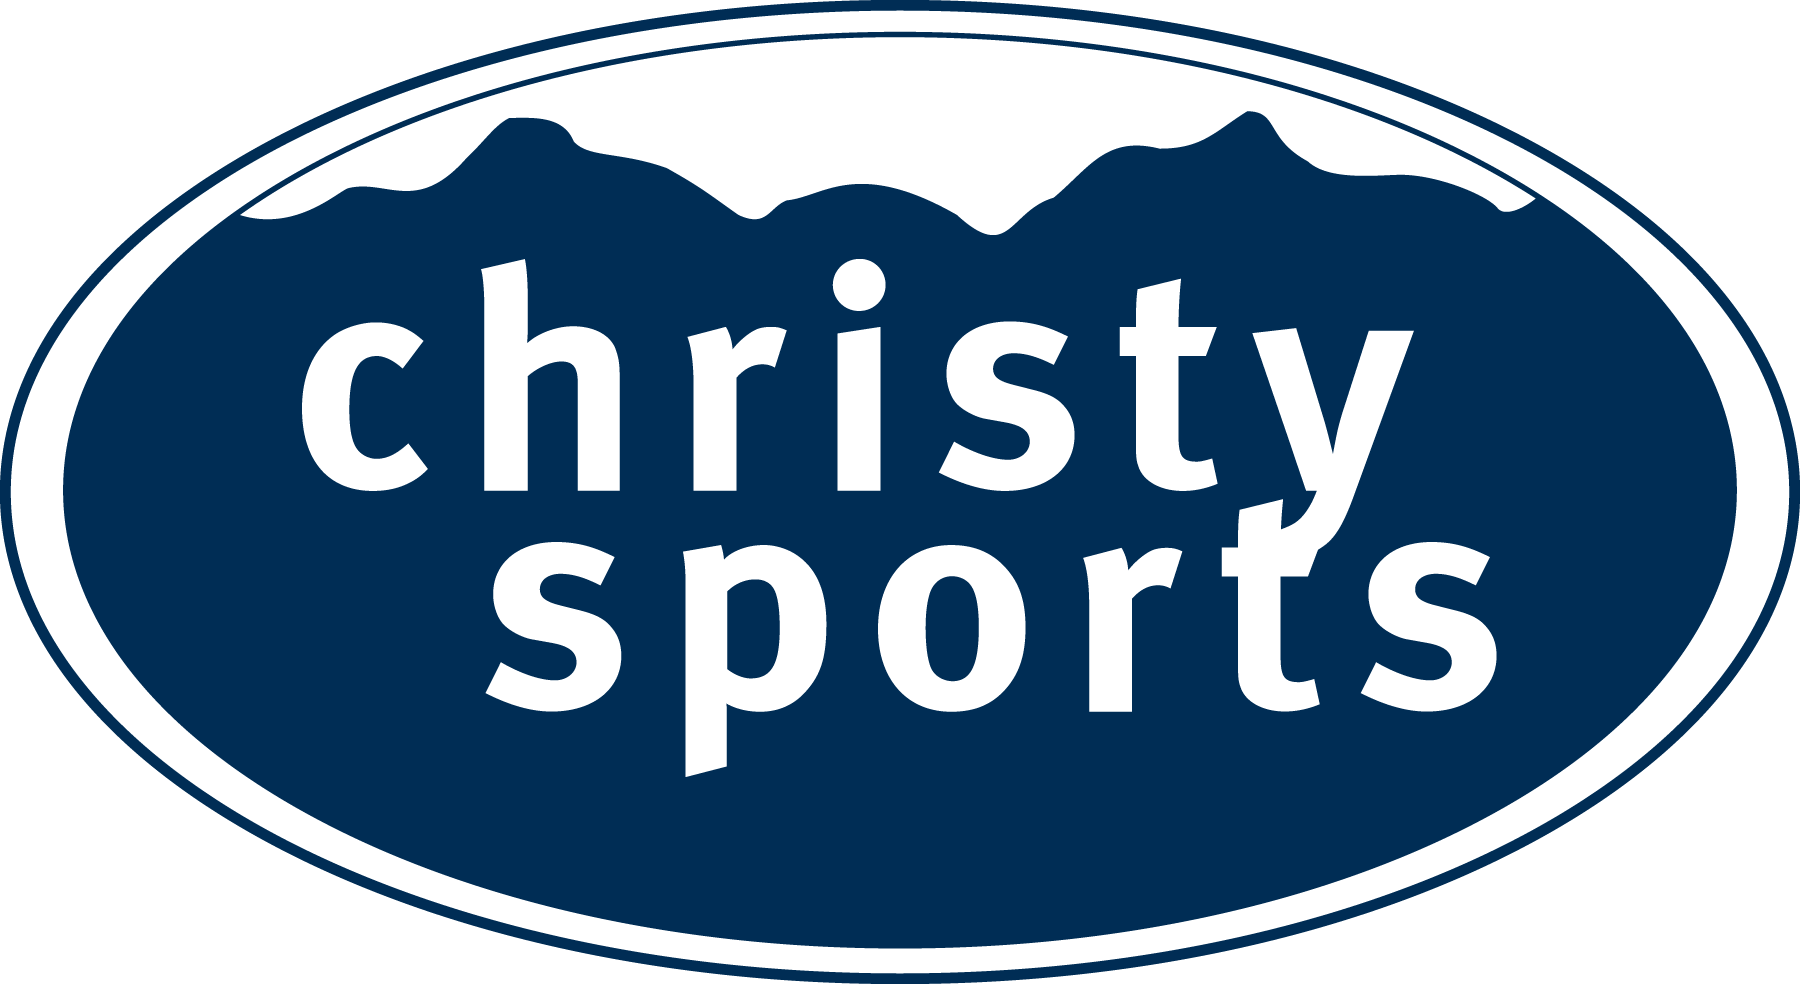 Christy Sports Season Rental Reservations Now Available for 2022-23 Season